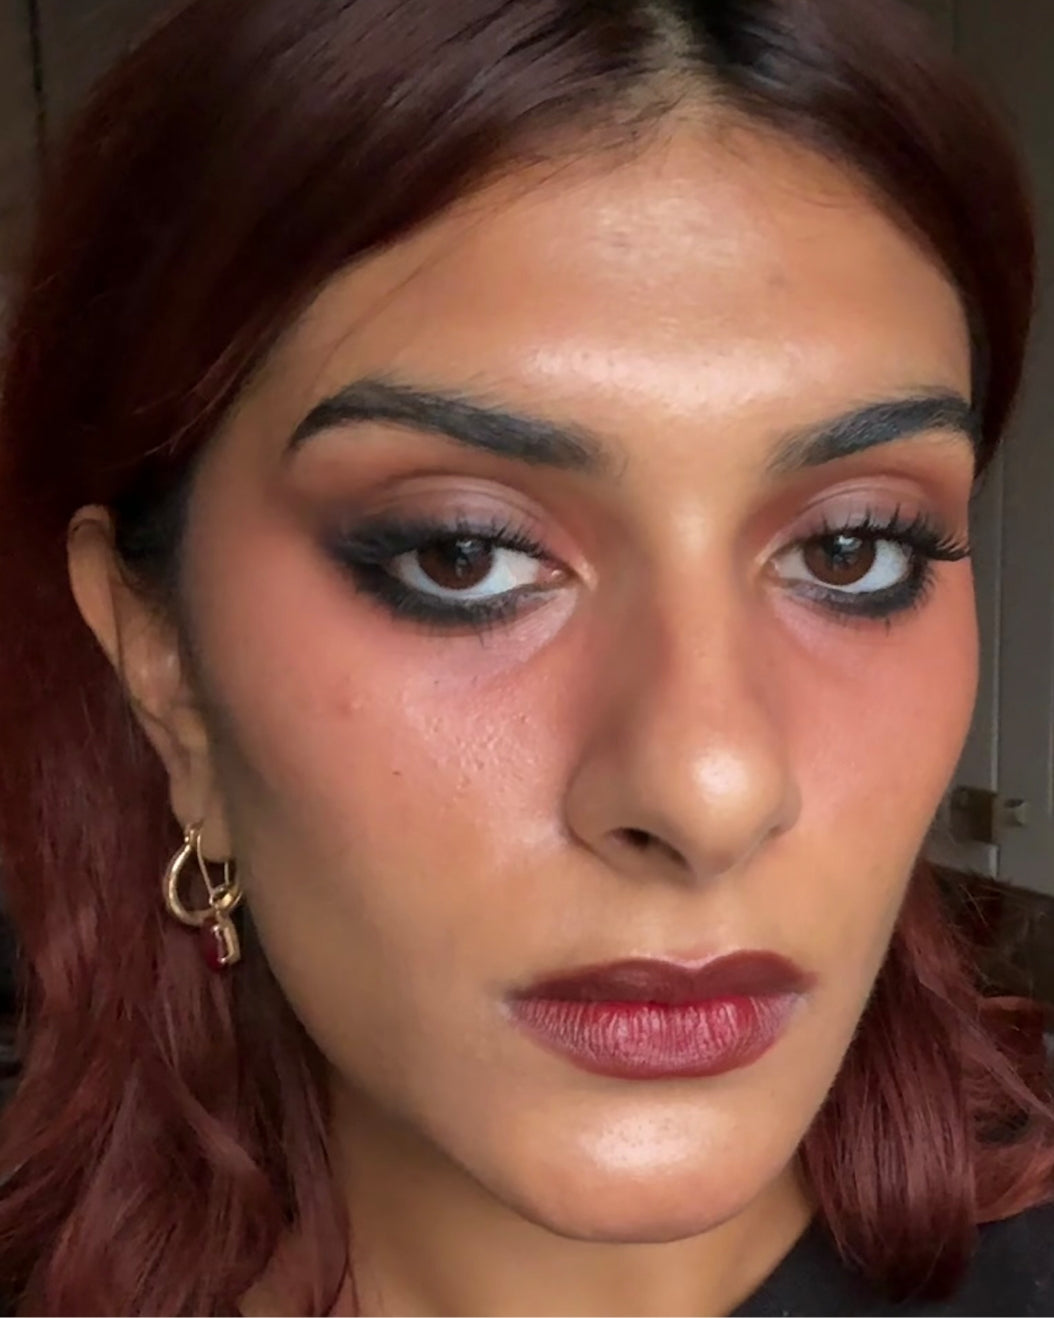 Model wears under eye blush trend achieved with Milk Makeup products